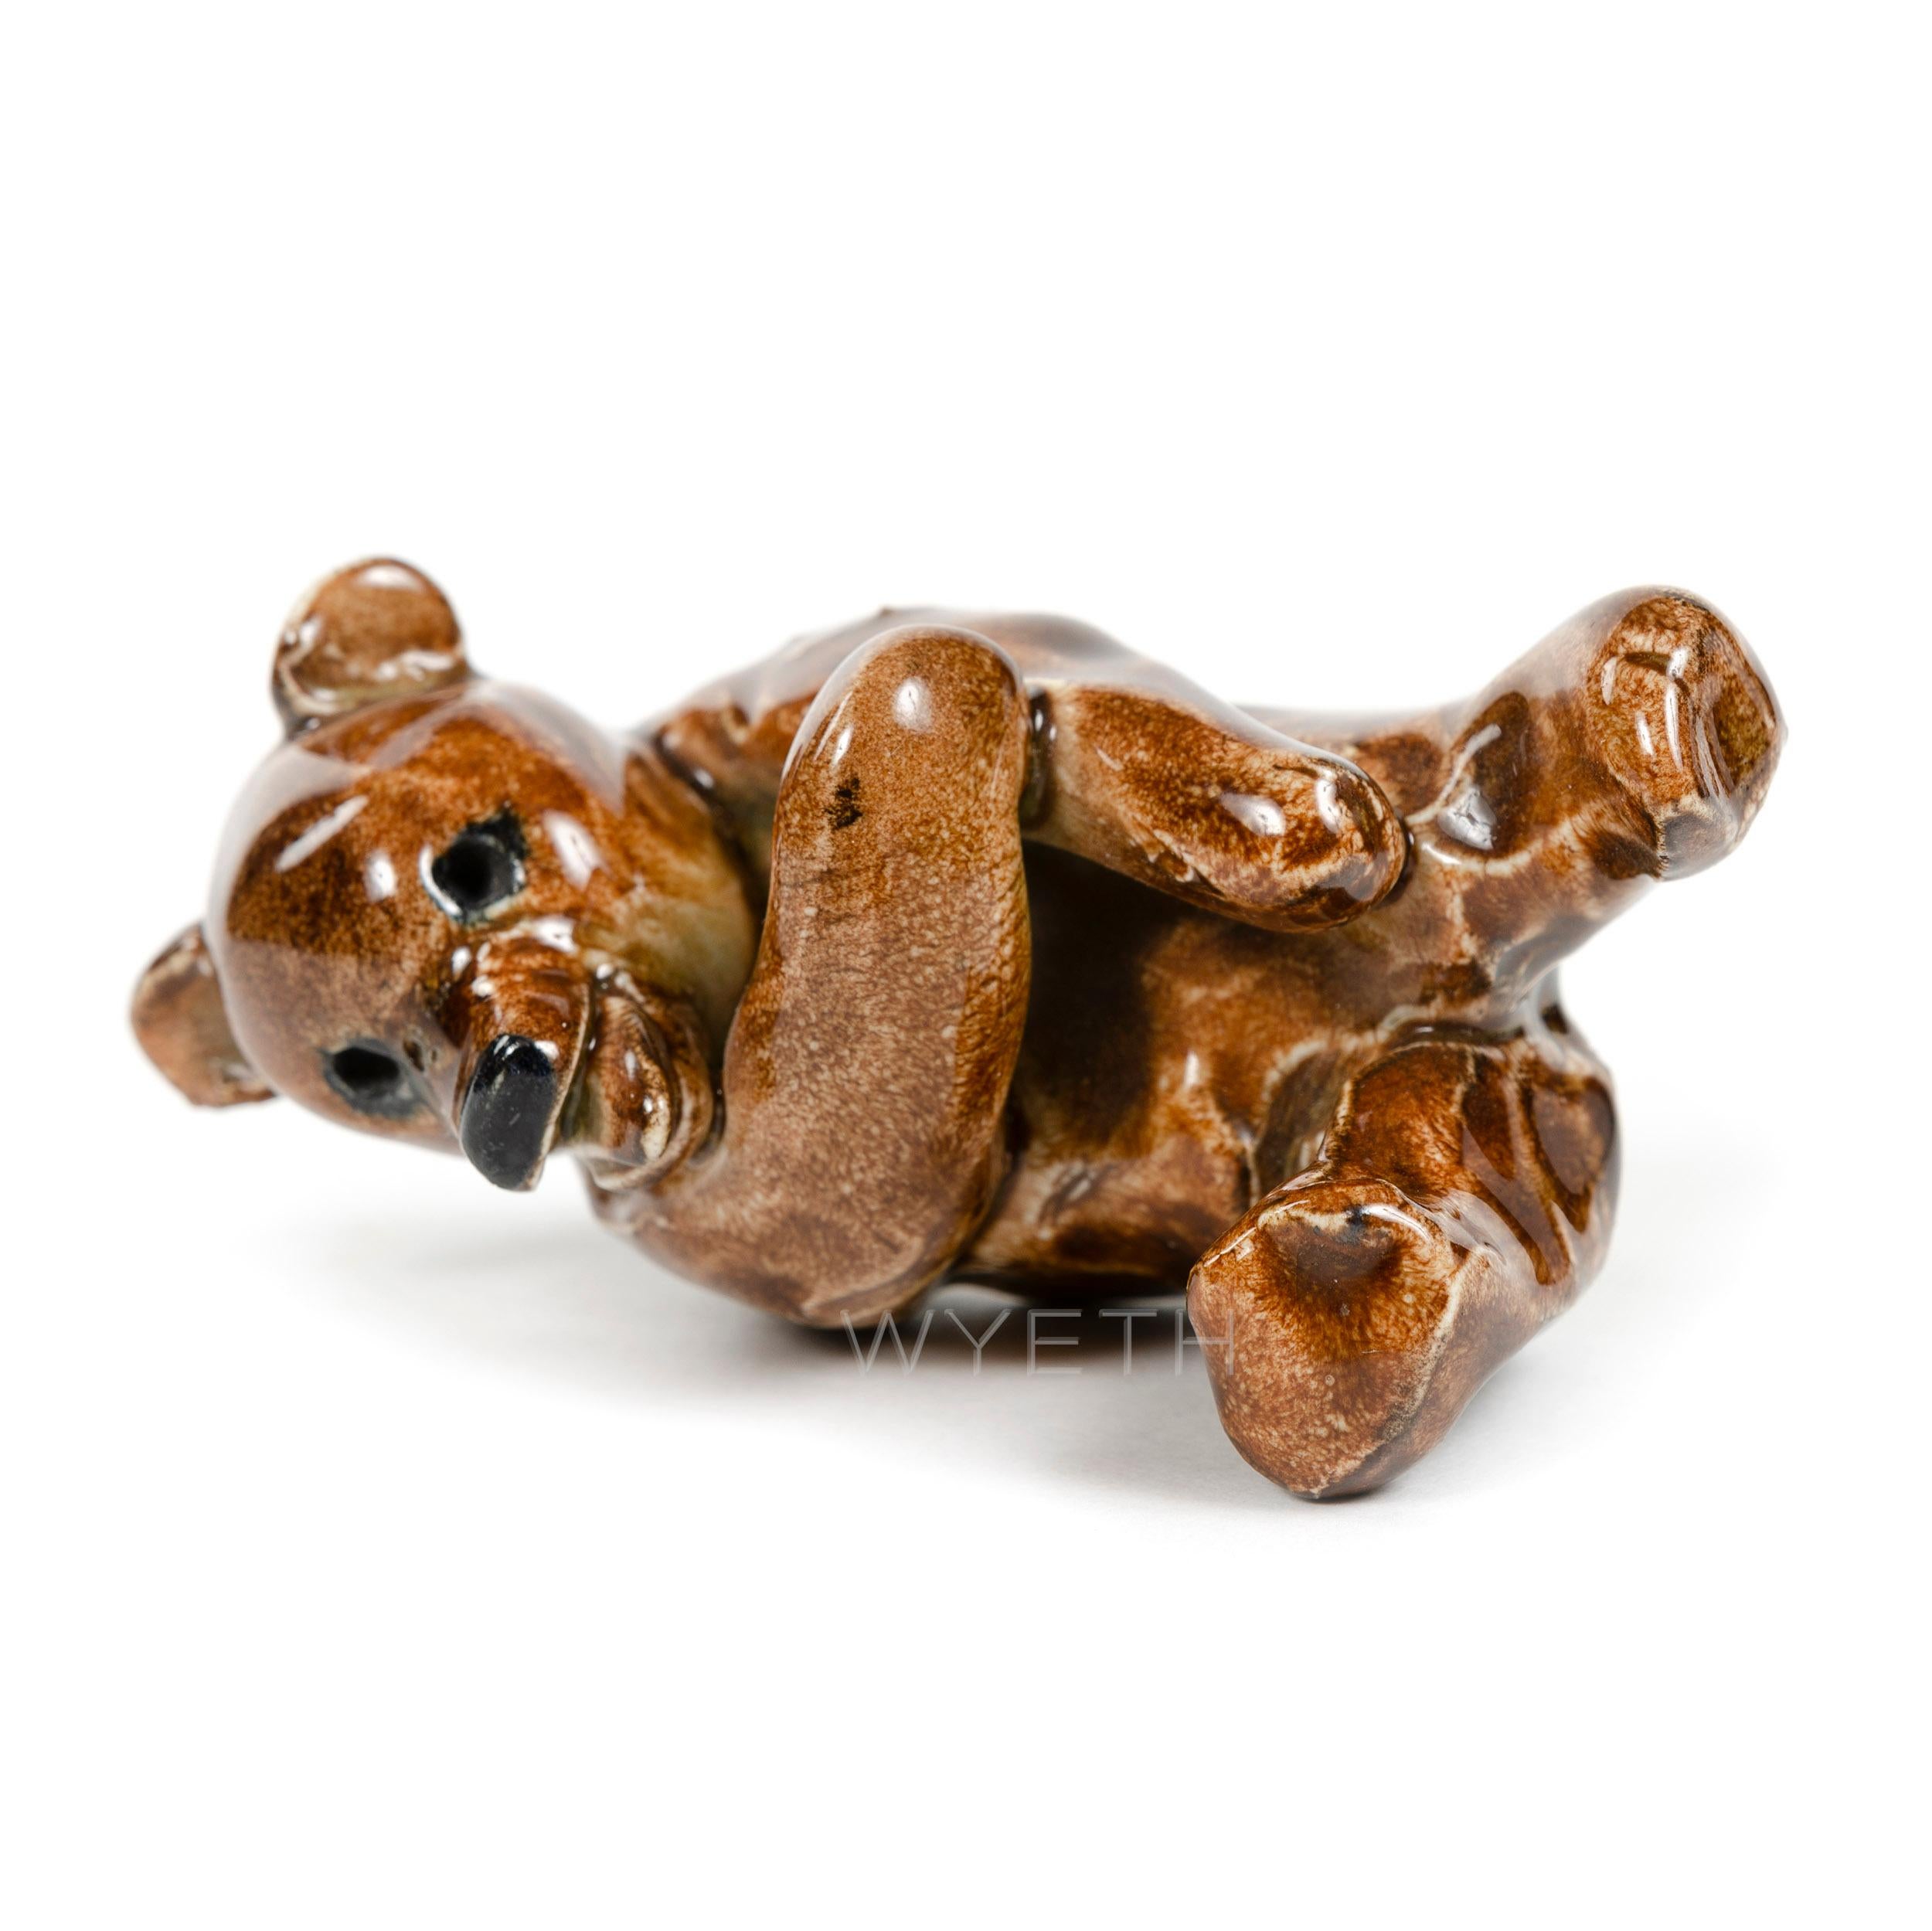 A cheerful and small ceramic bear laying on its back, laughing, in a high-gloss brown and black glaze.